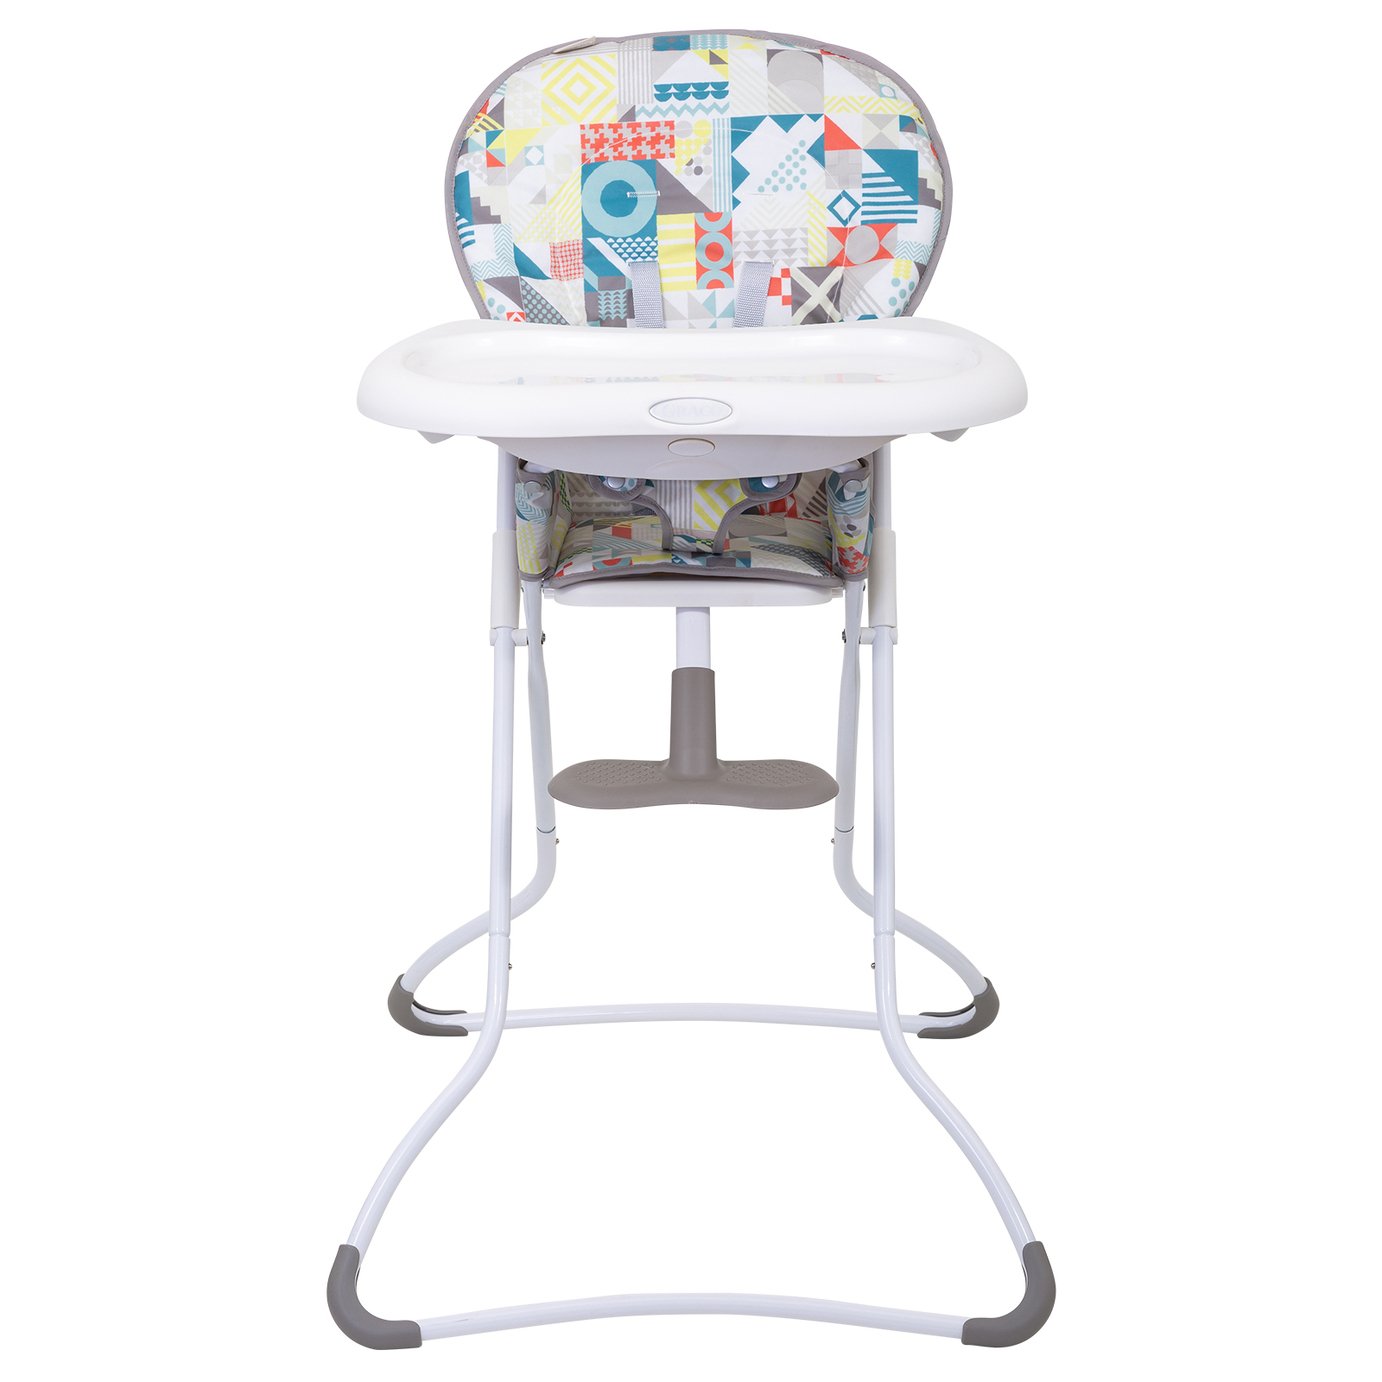 Graco Snack N Stow Highchair Review